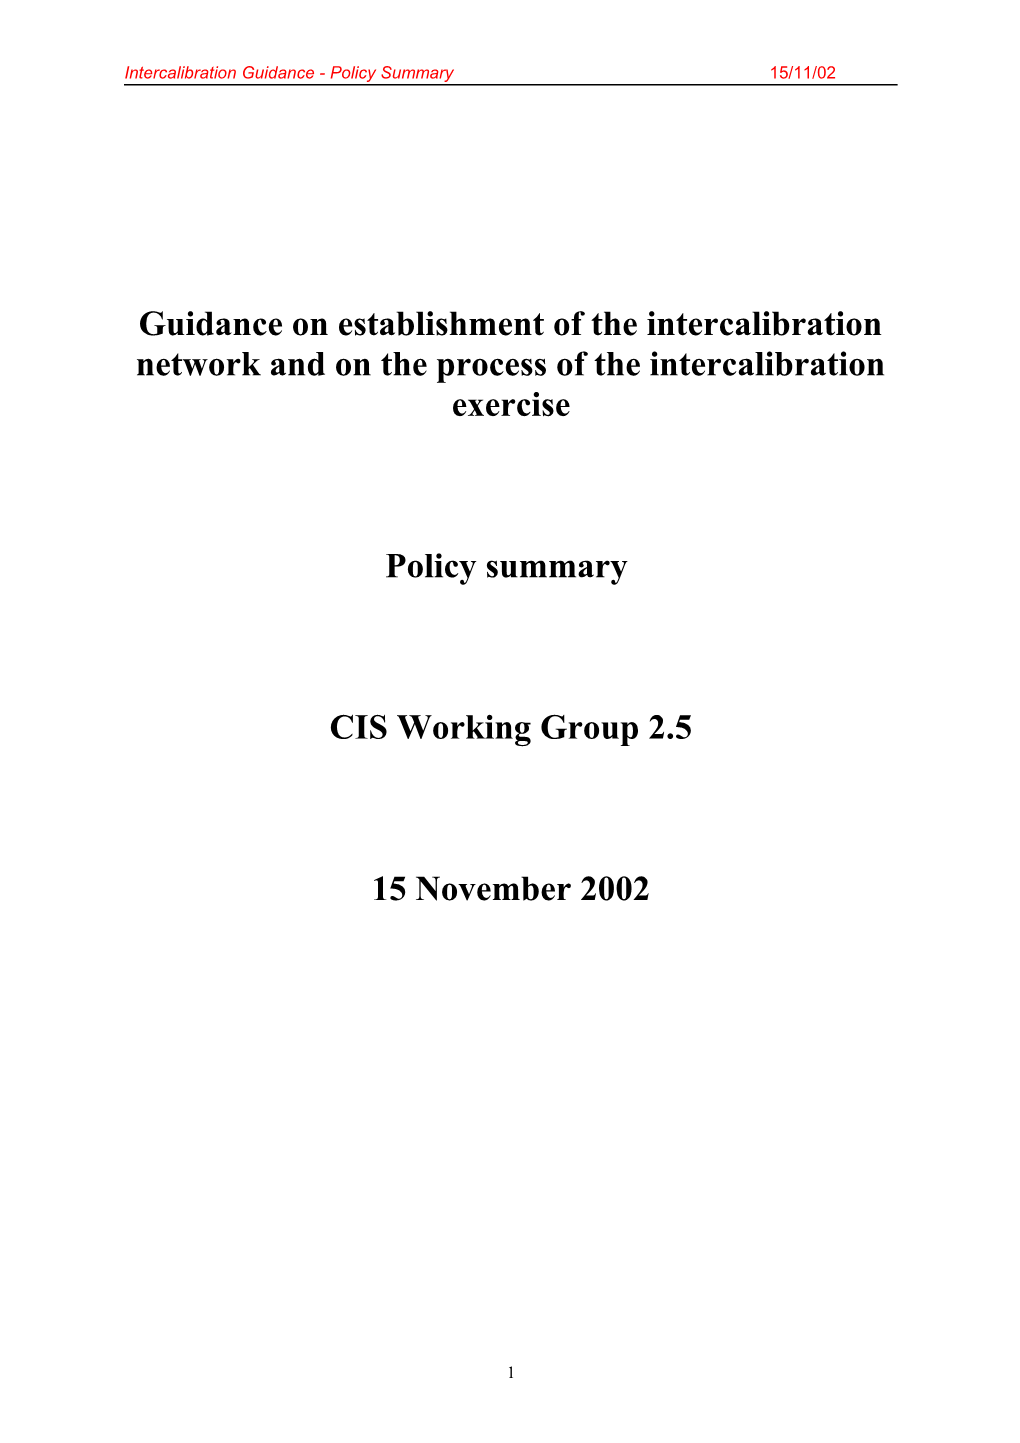 Guidance on Establishment of the Intercalibration Network and on the Process of The